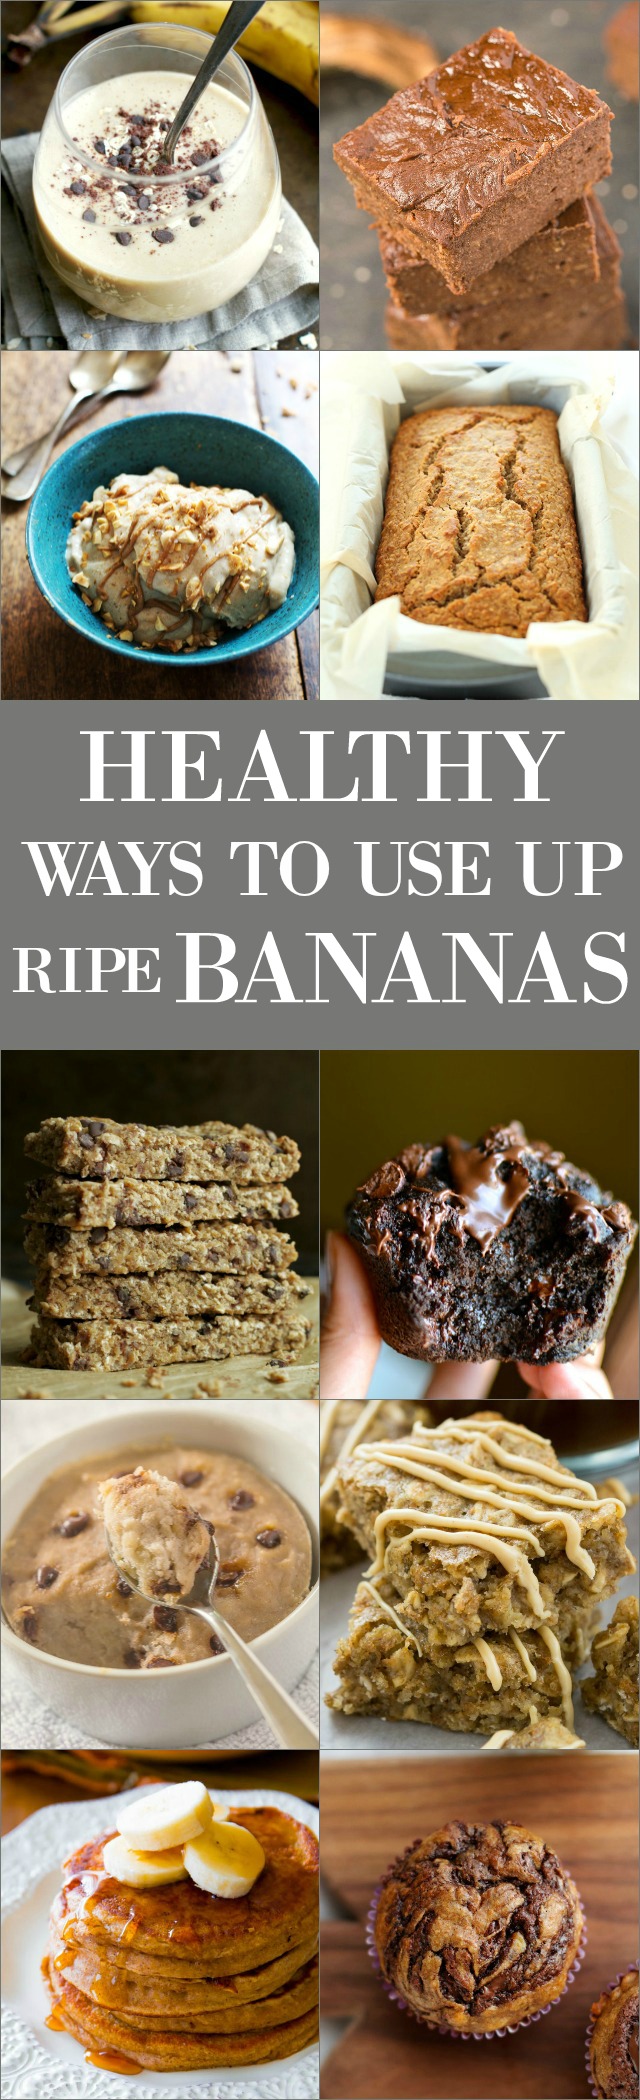 Don't know what to do with those ripe bananas? Or just looking for some crazy good banana recipes? We've got ya covered!